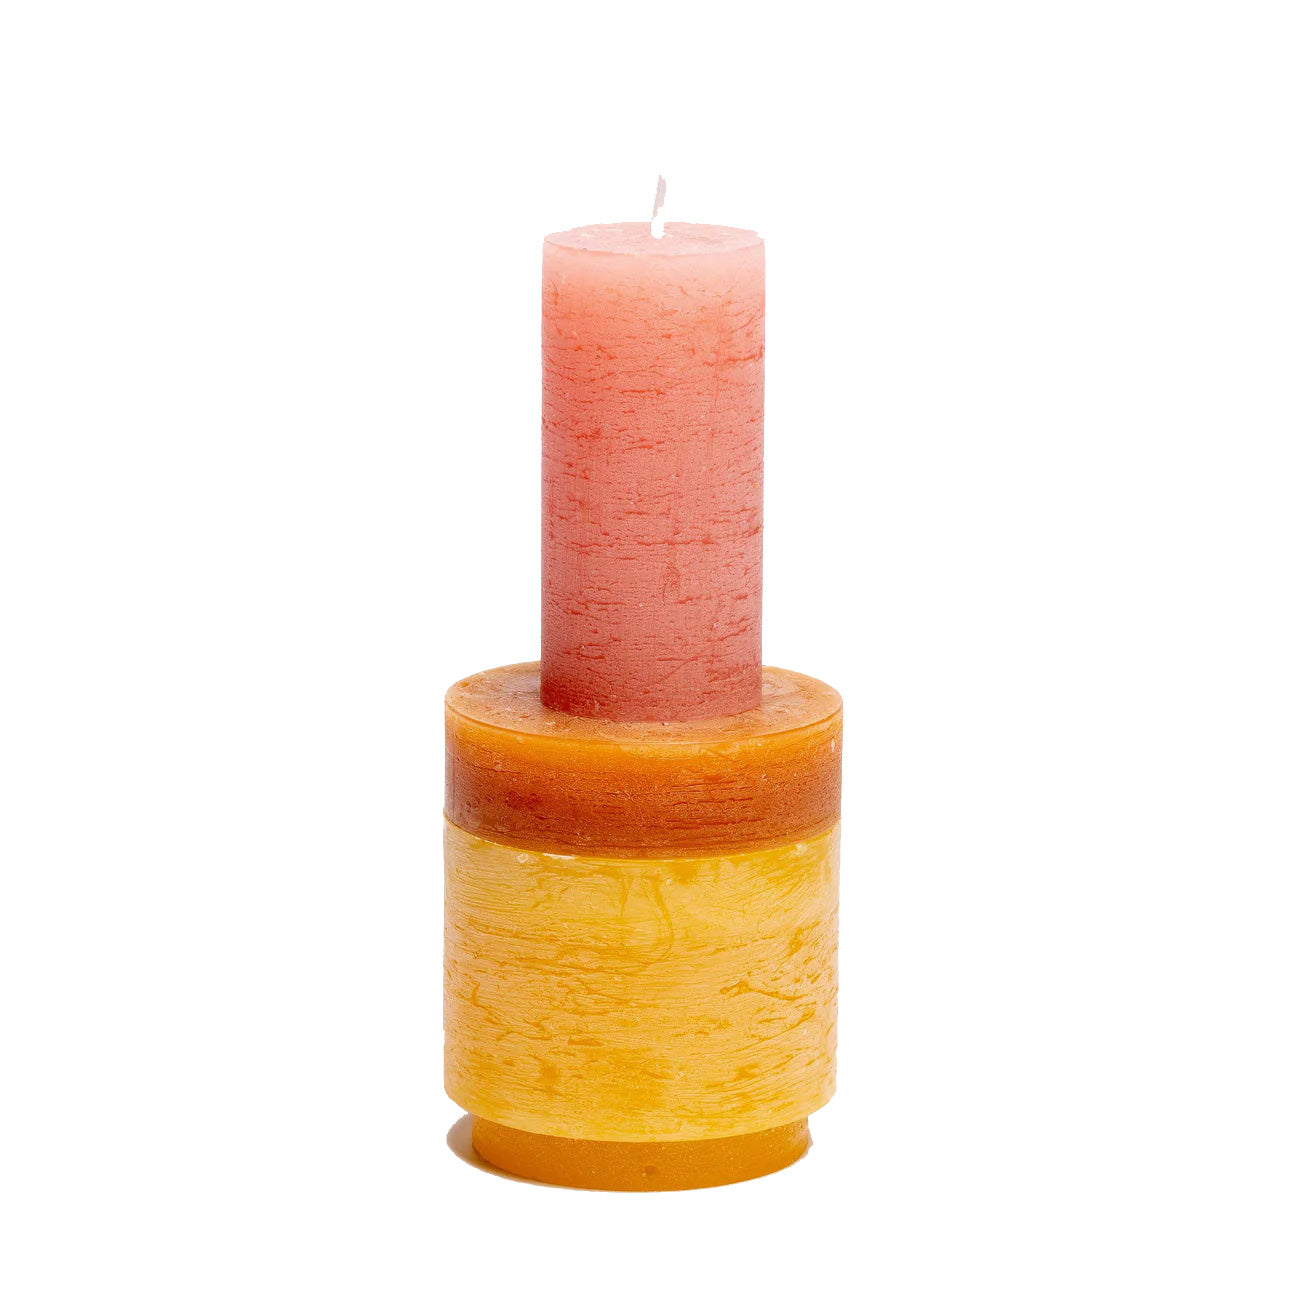 Candle Stack 02 in Yellow